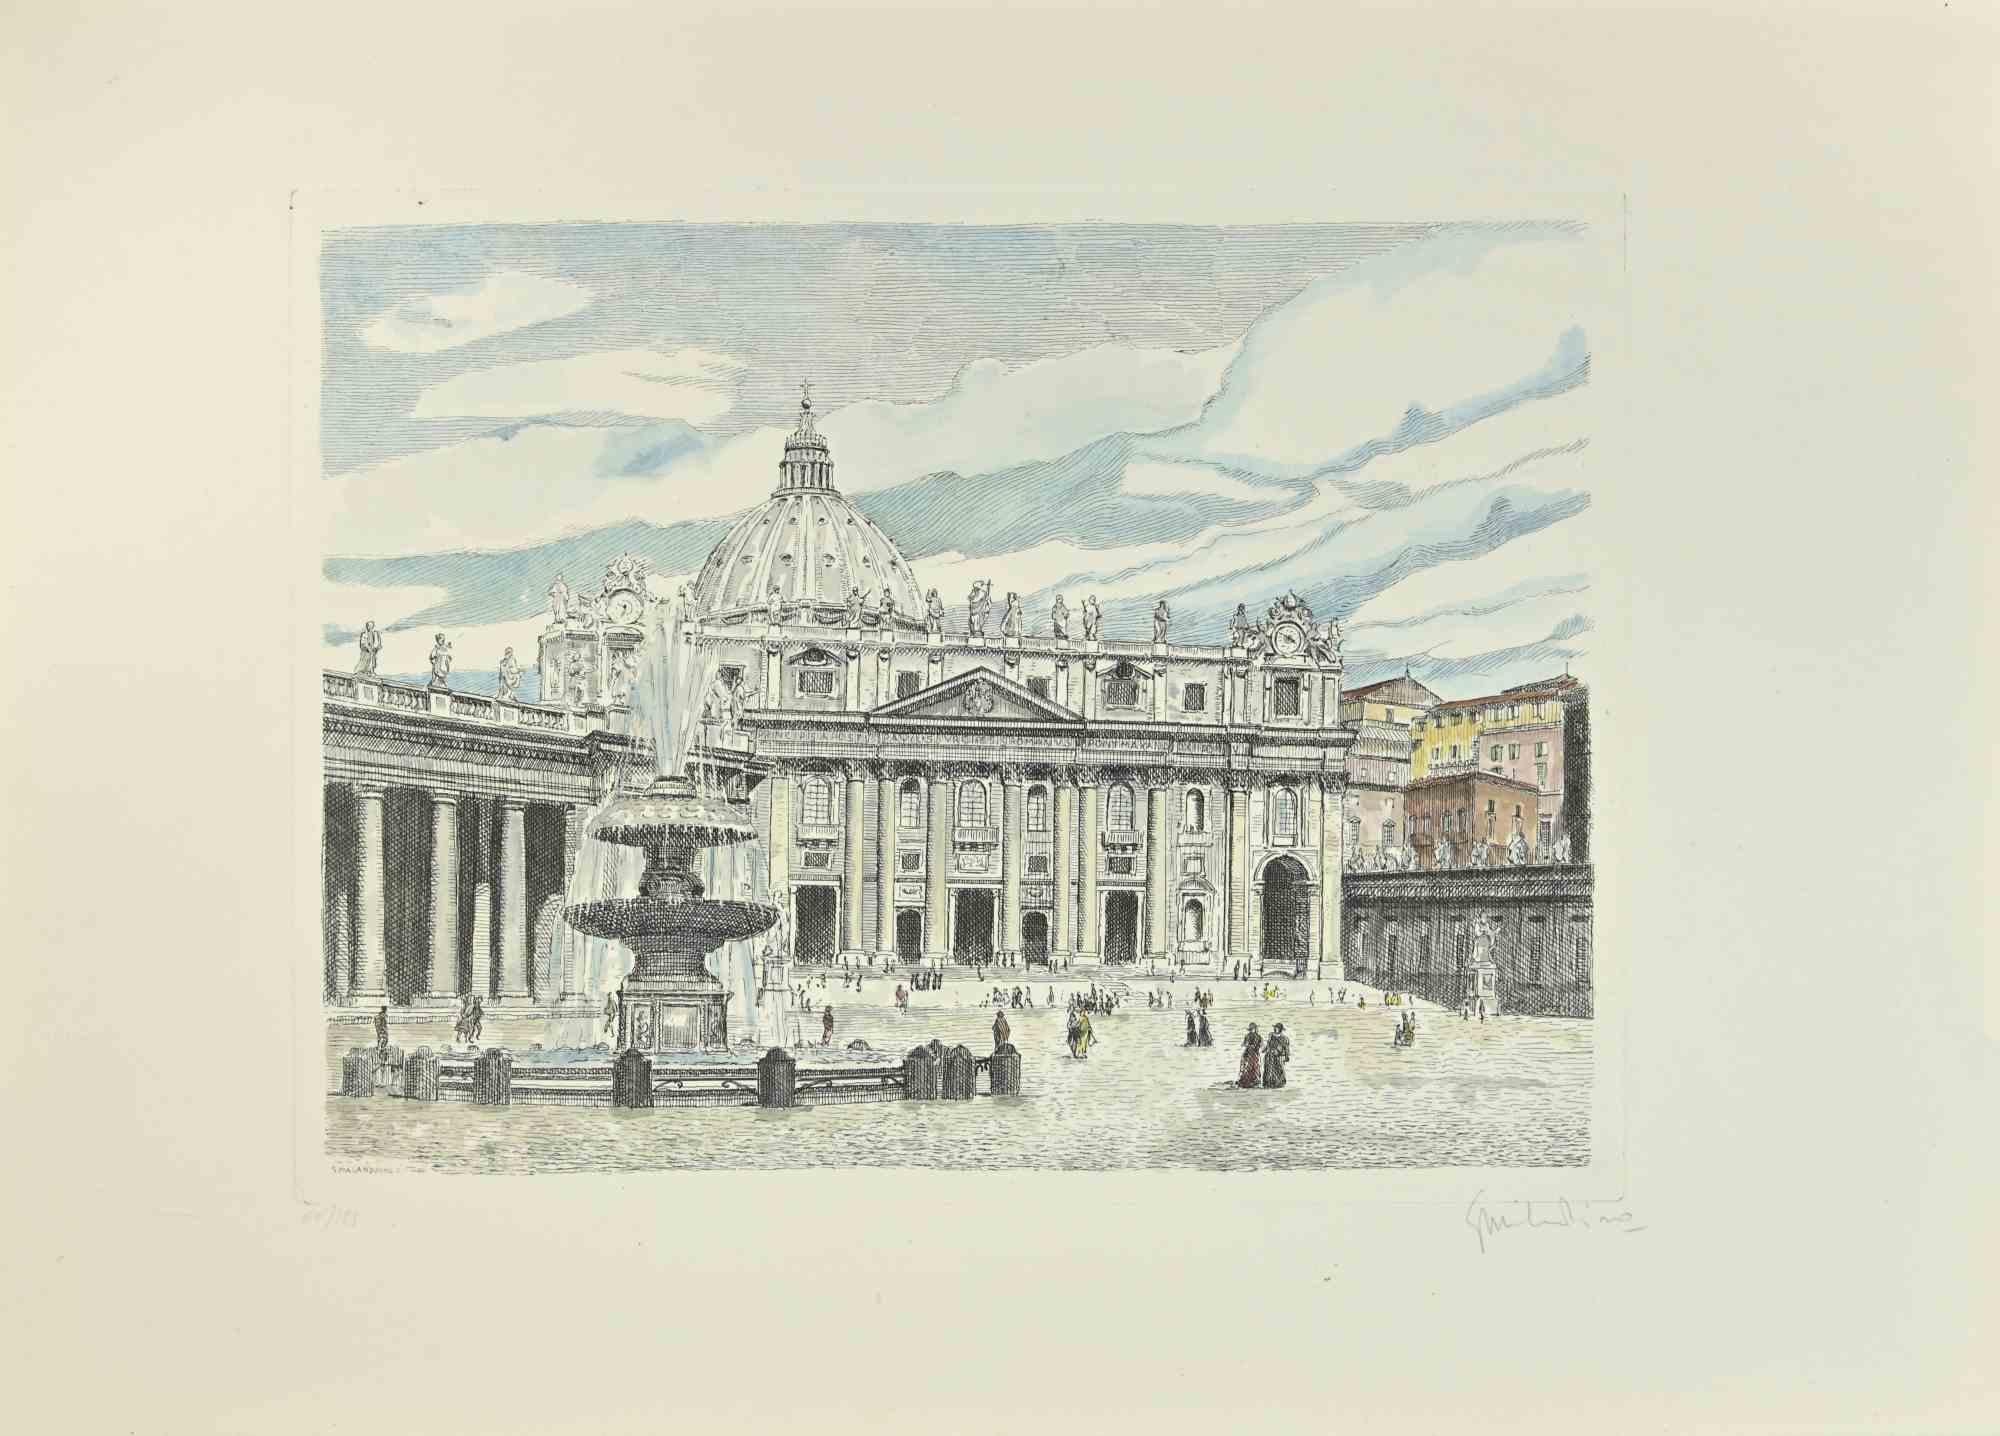 Saint Peter is a artwork realized by Giuseppe Malandrino.

Original print in etching technique.

Hand-signed by the artist in pencil on the lower right corner.

Numbered n. 60/199 edition on the lower left corner.

Good conditions. 

Giuseppe